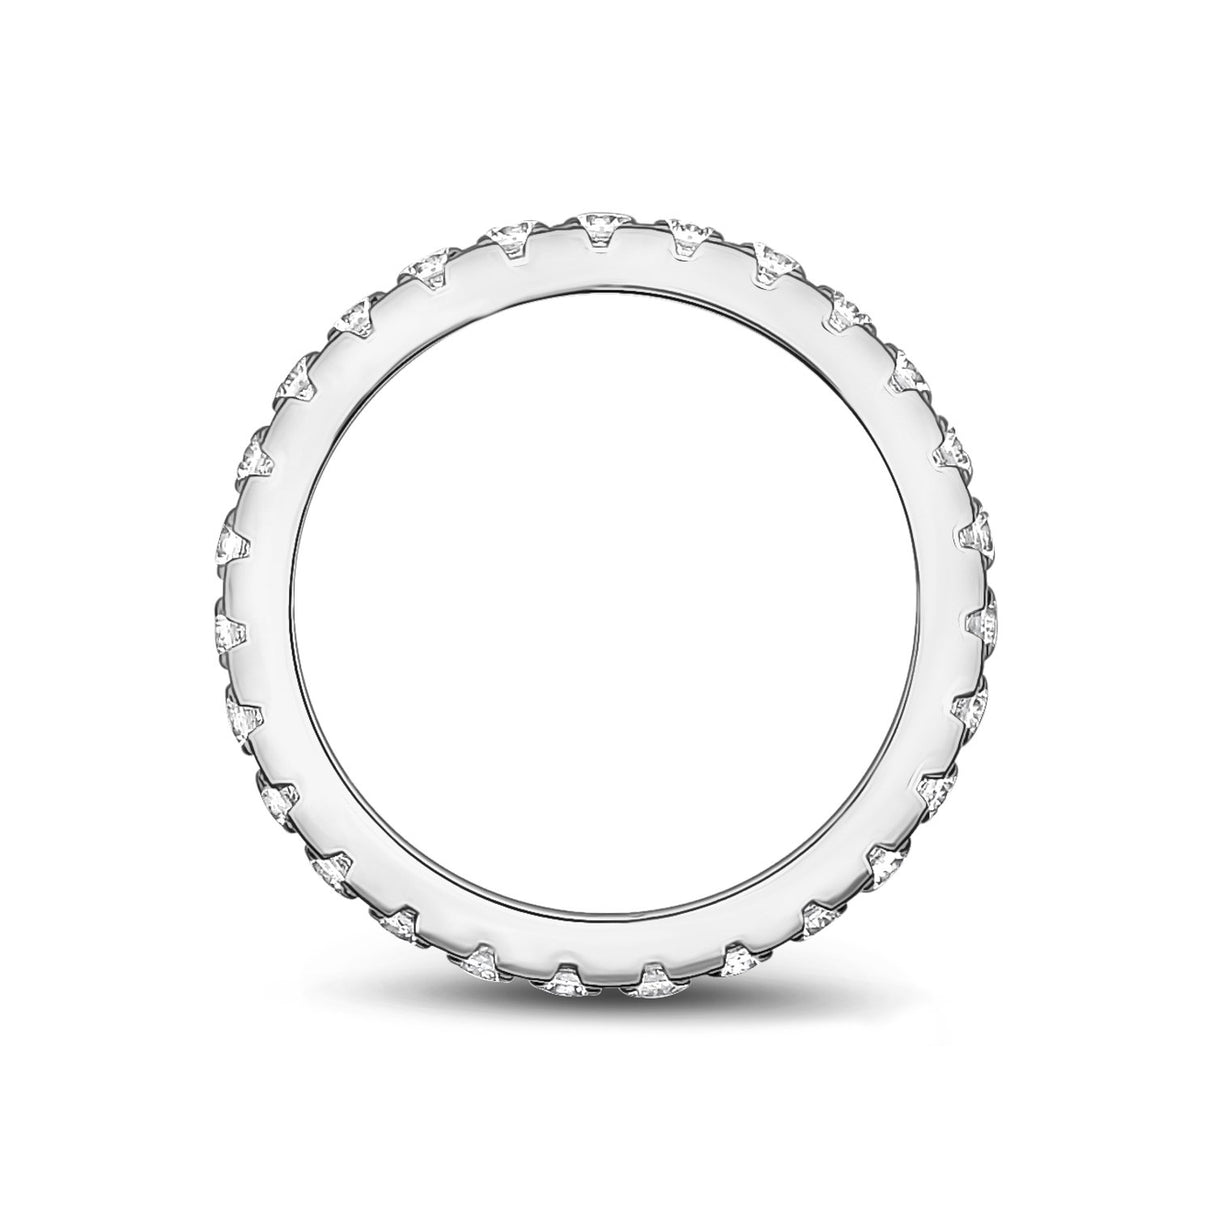 2.5mm Eternity Band - Anel Mulher - The Steel Shop